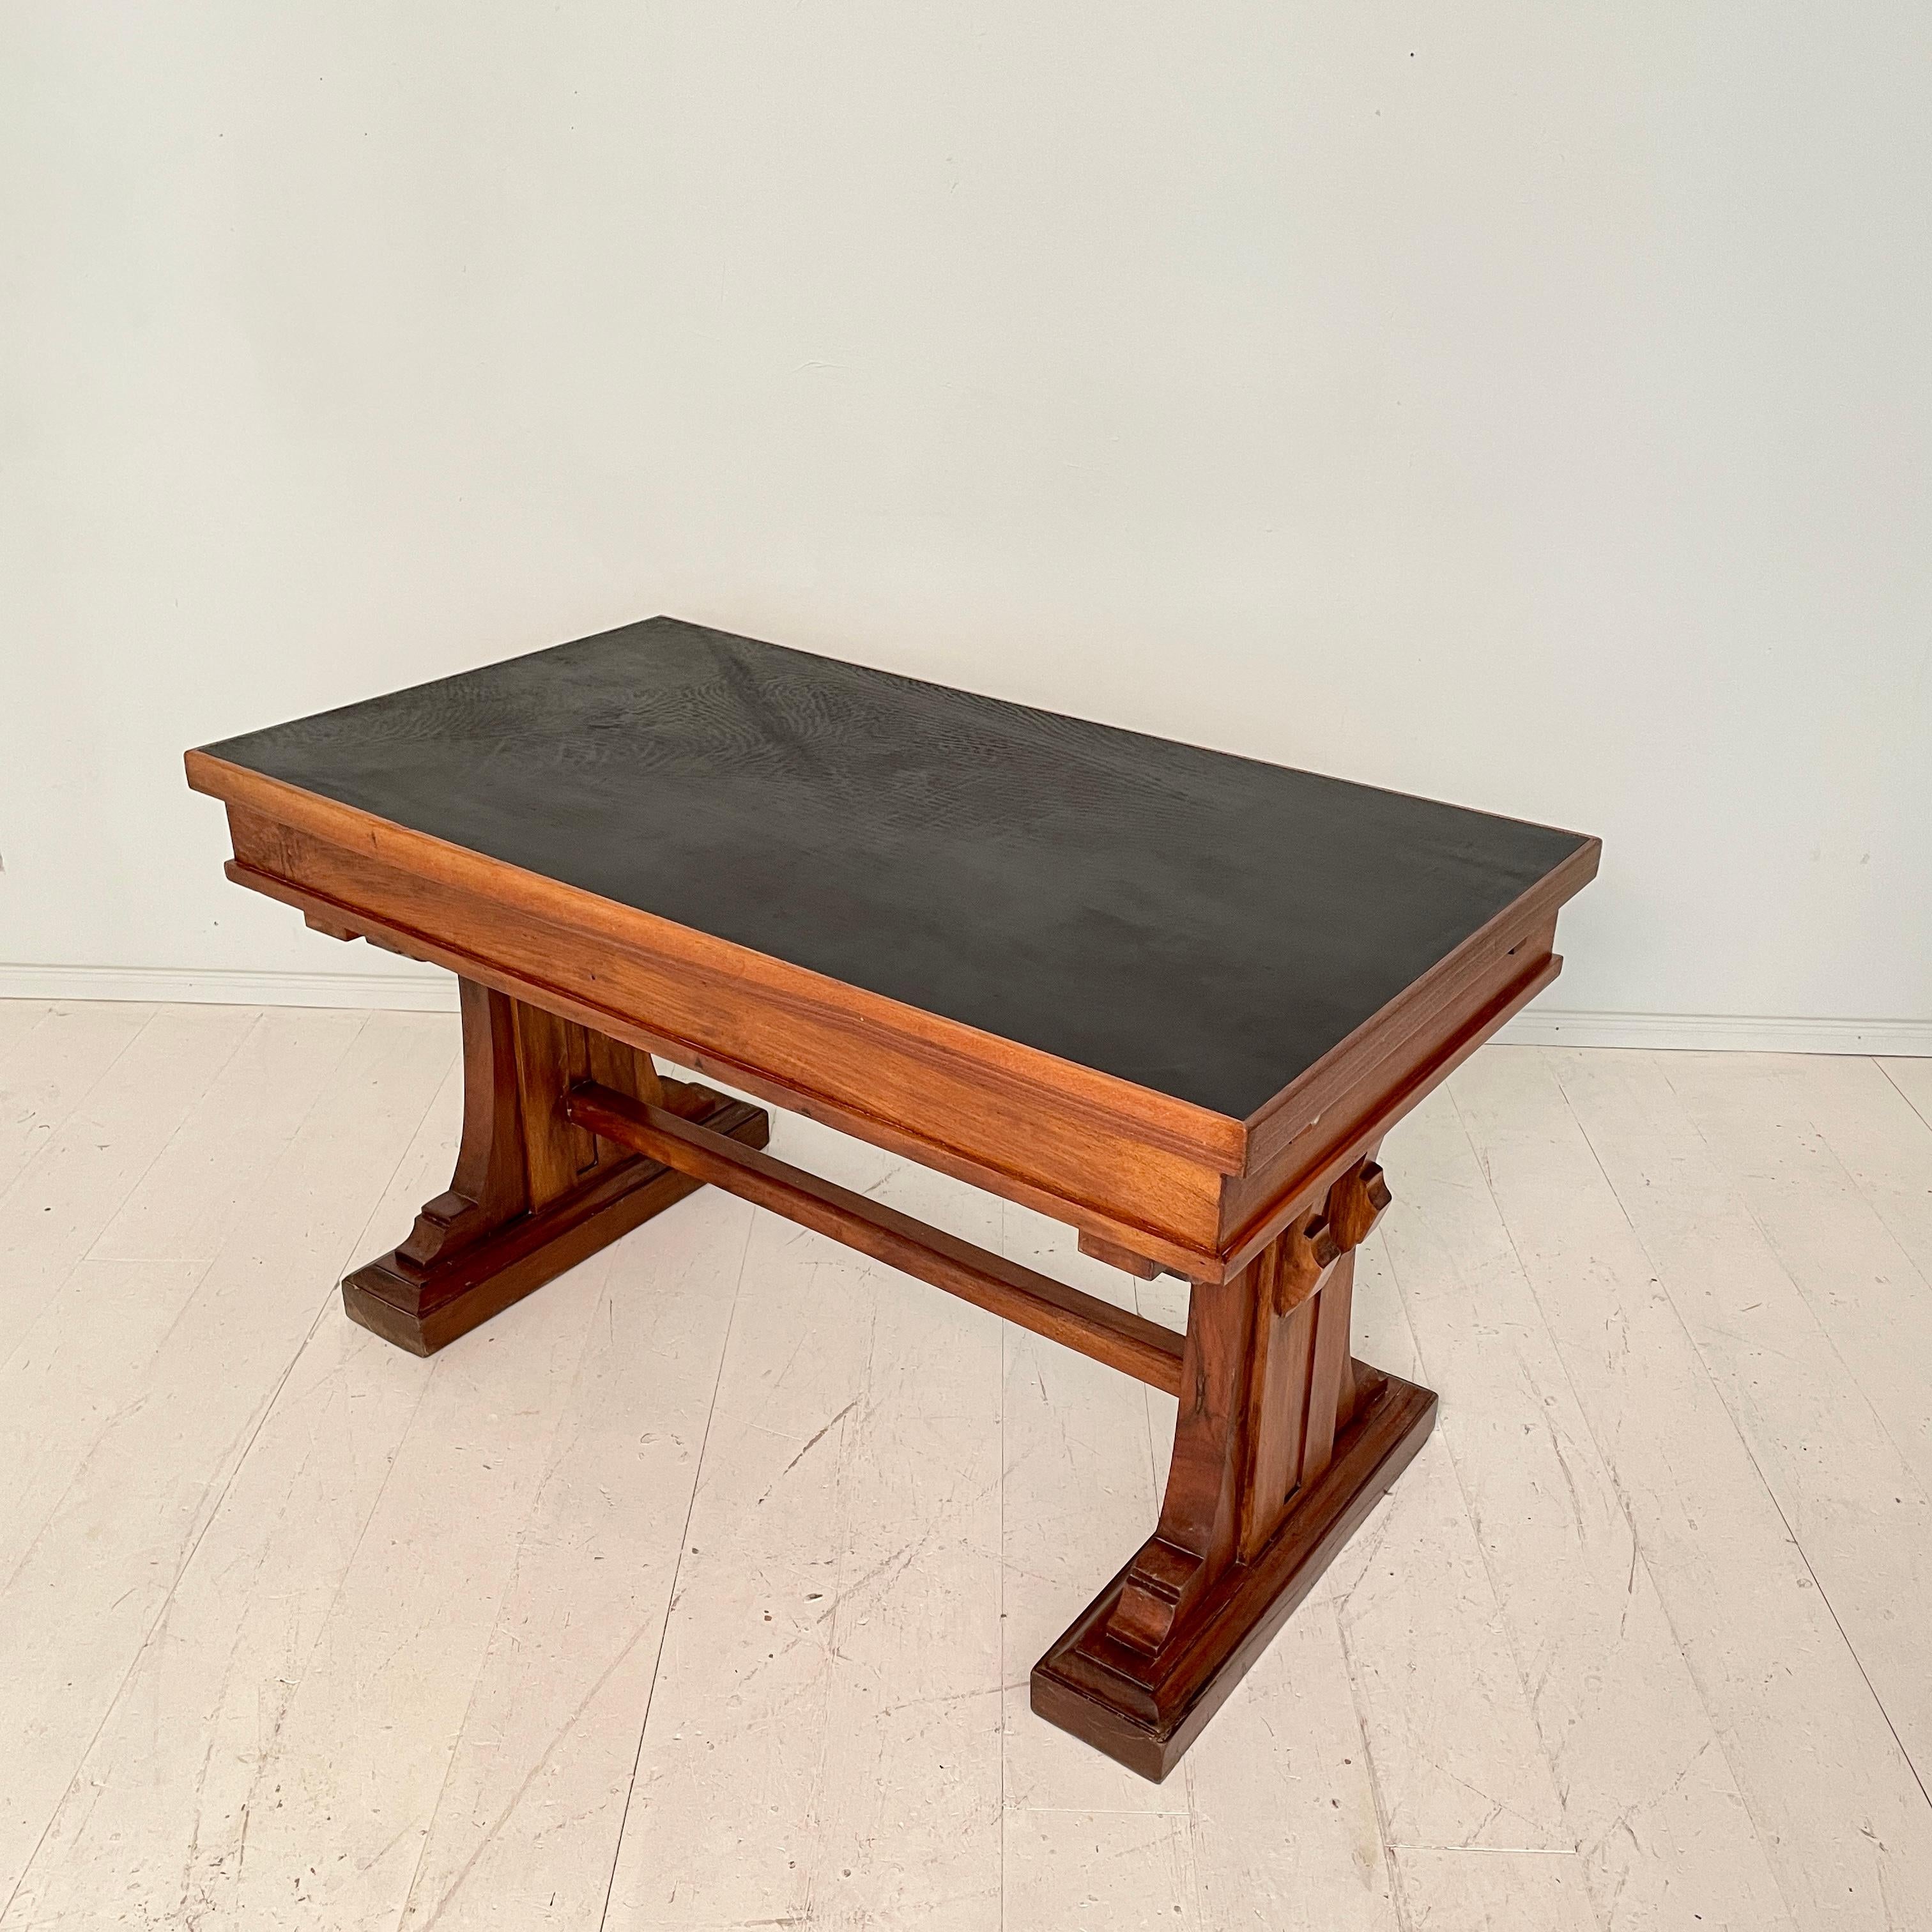 Italian Art Deco Desk or Writing Table in Walnut and Black Leather Top, 1920s 4